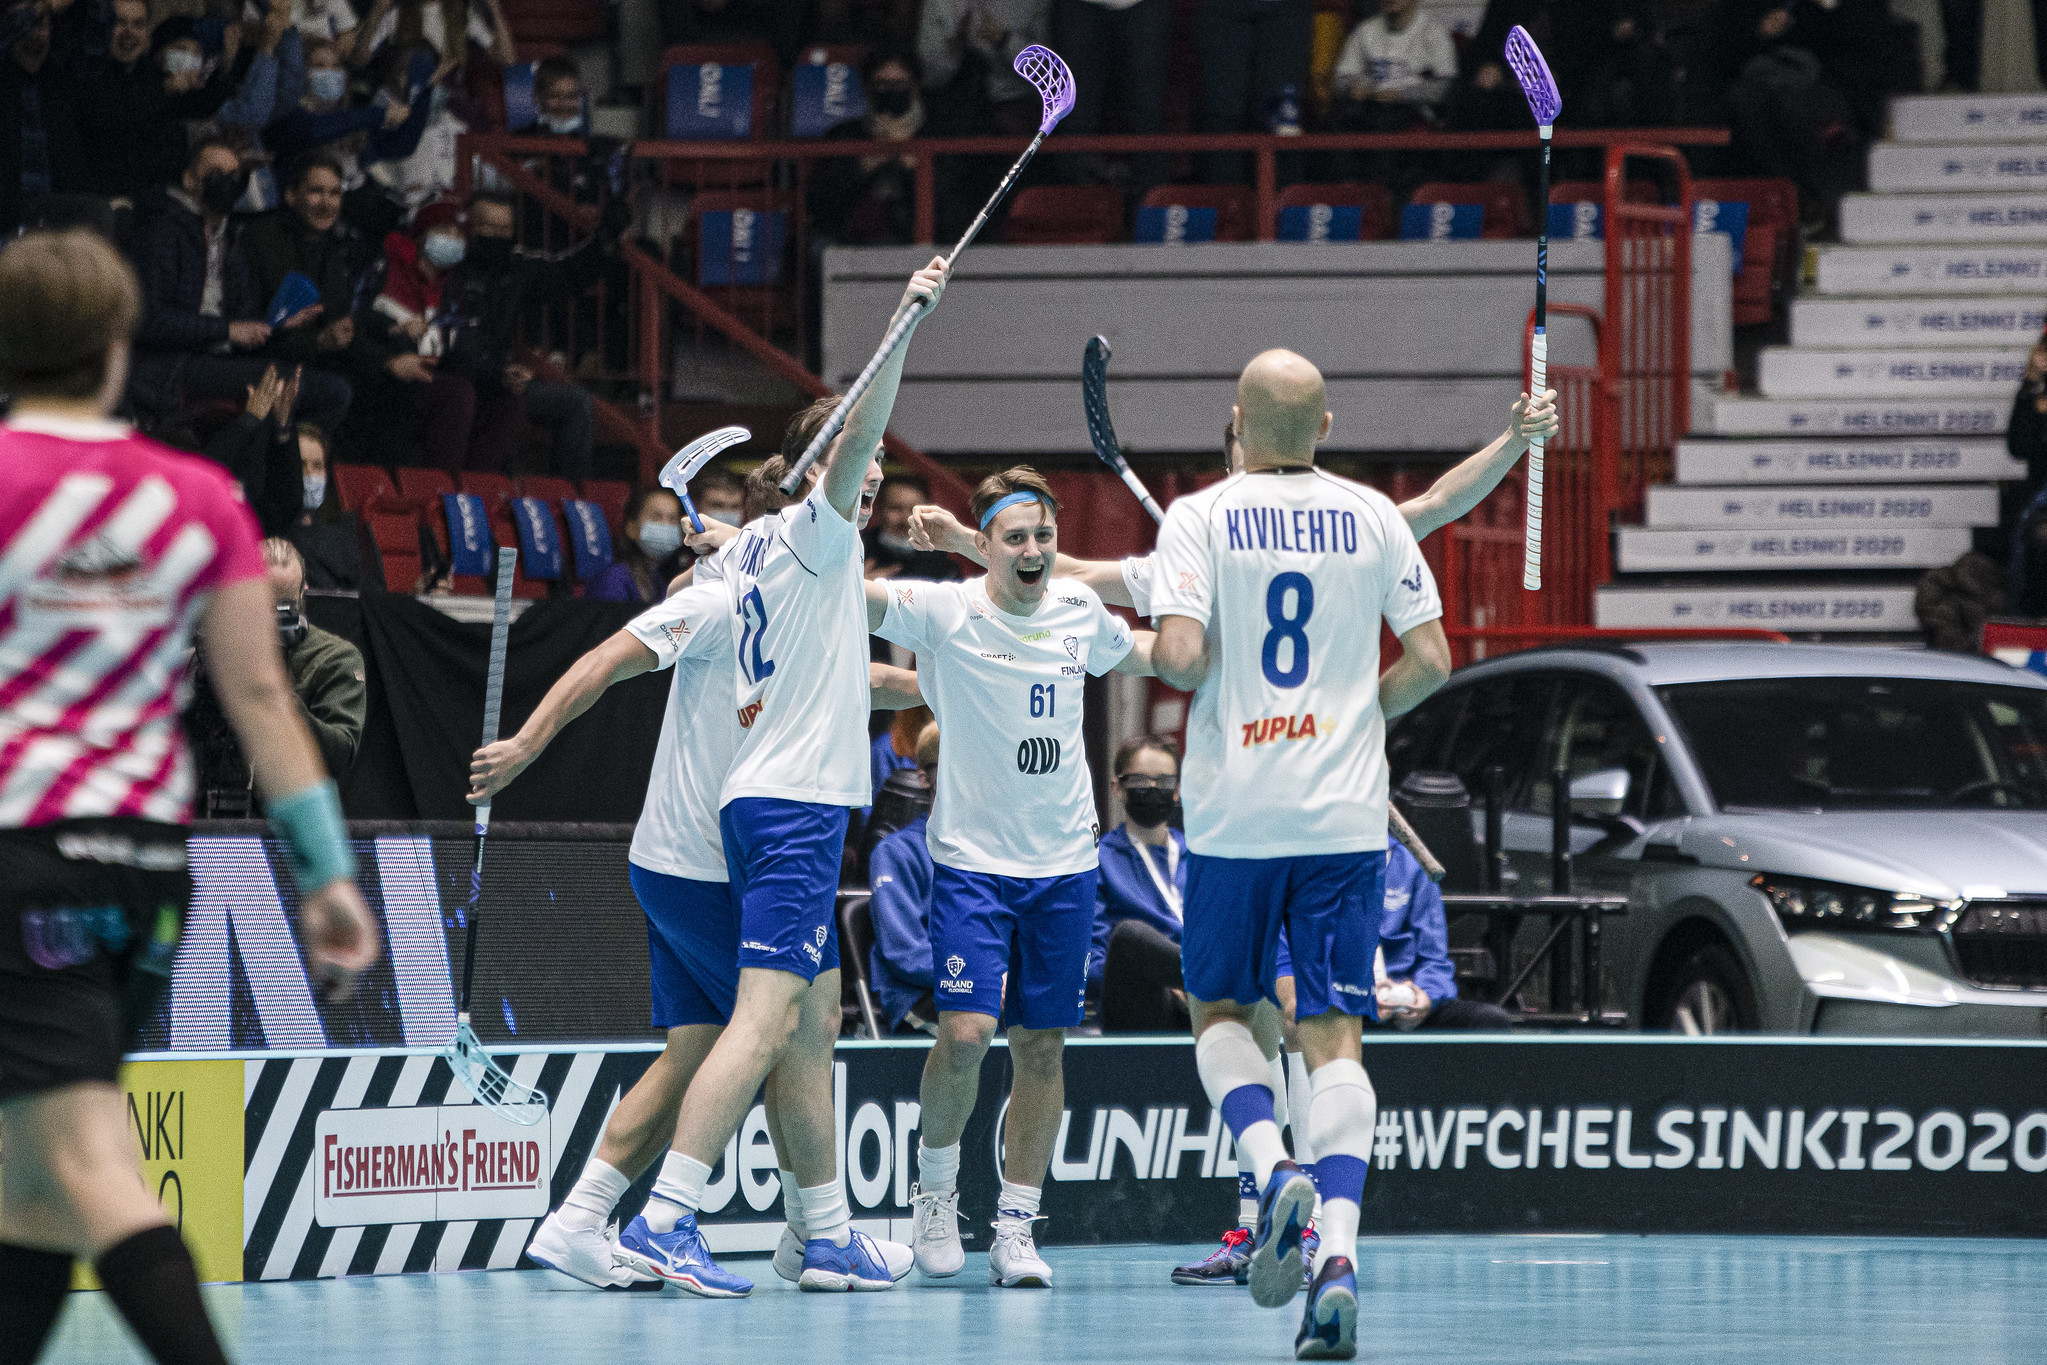 Finland overcame Sweden in their Group A match today ©IFF